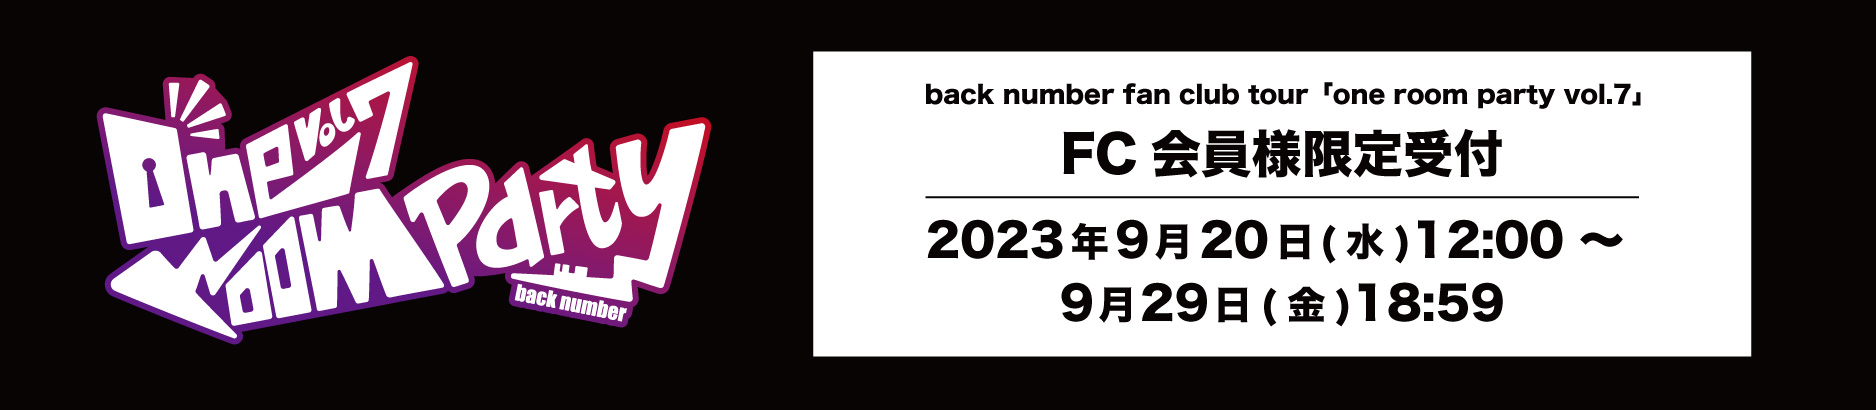 back number fan club tour 2024『one room party vol.7』詳細発表！